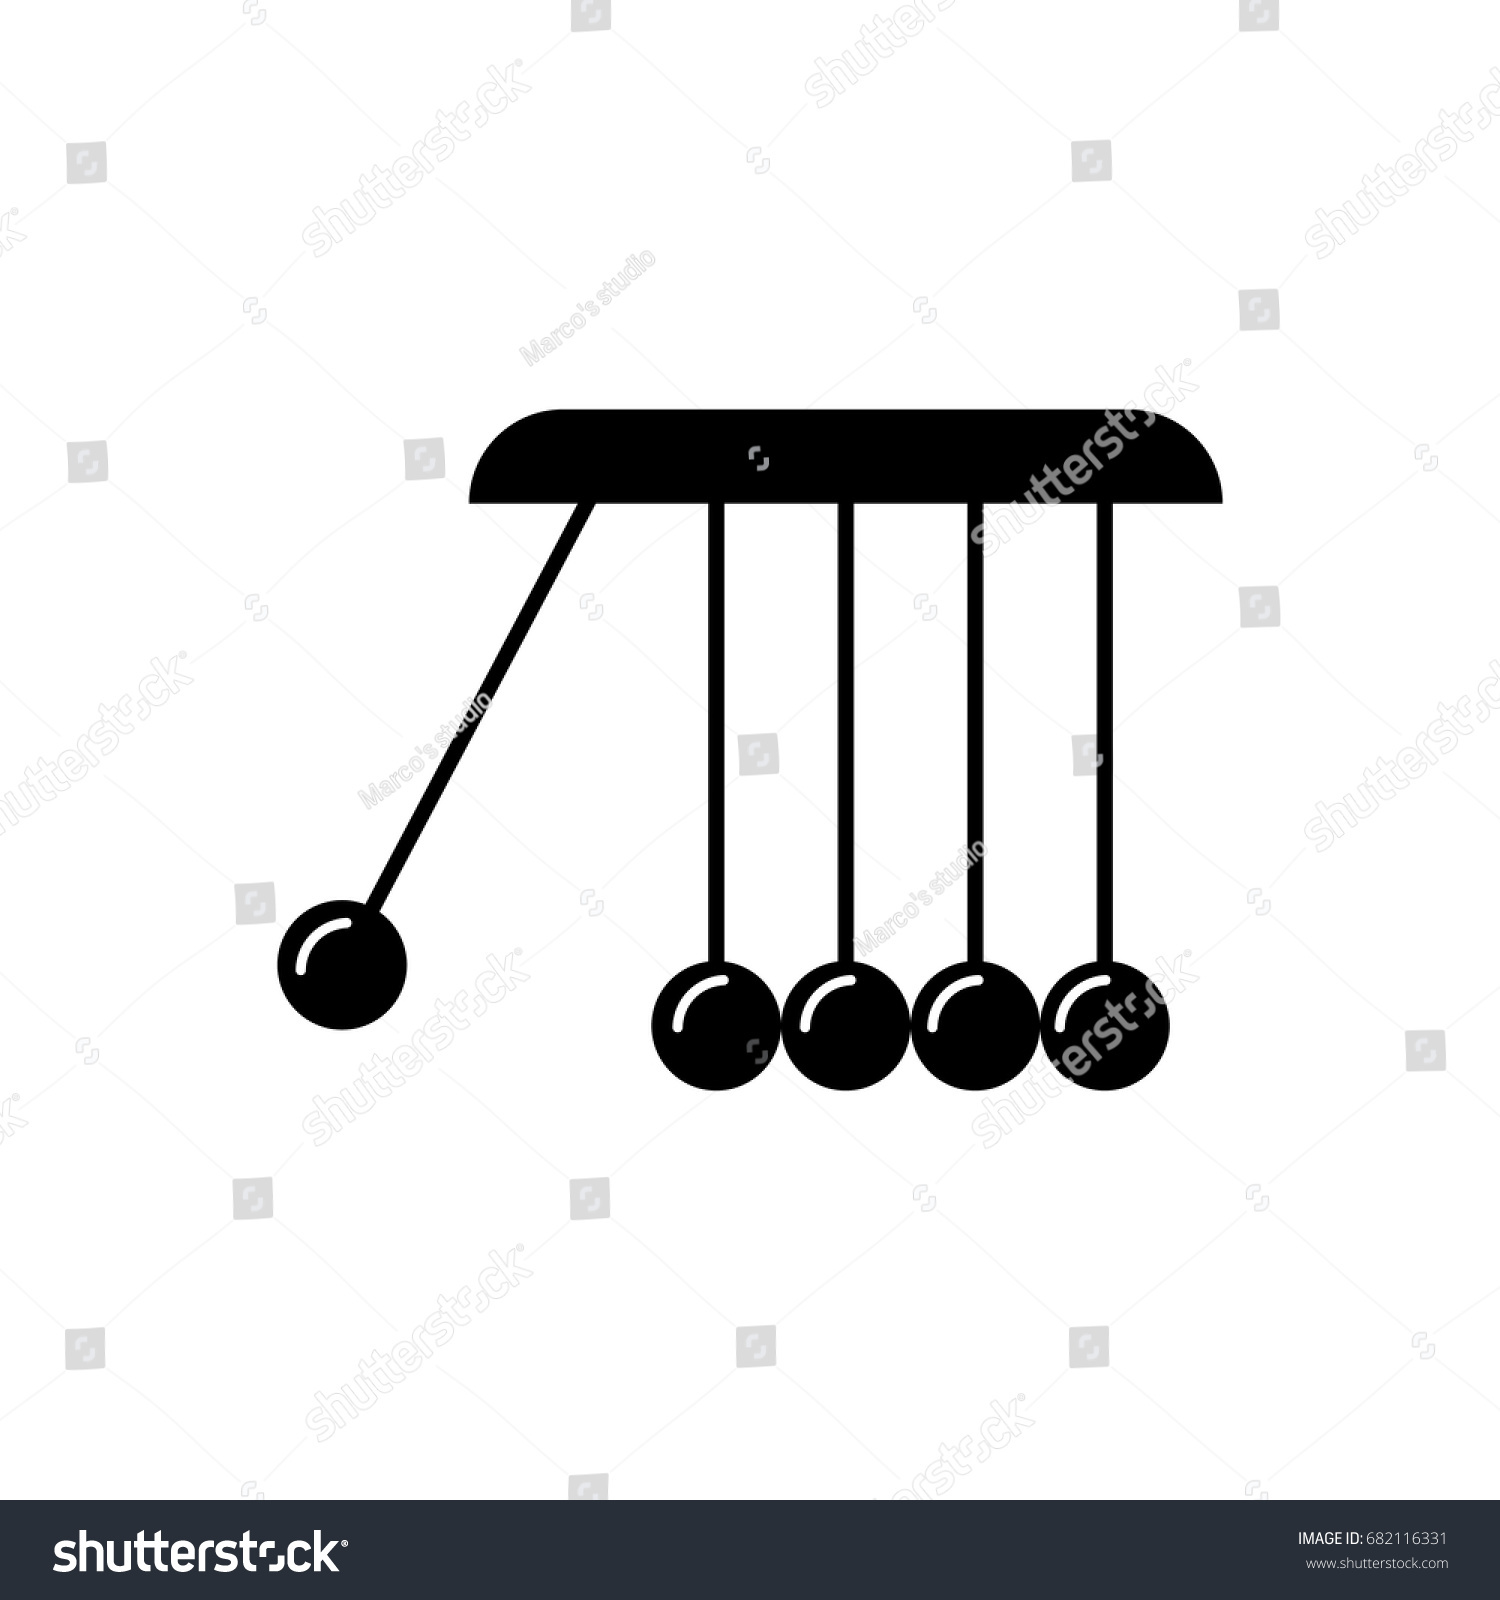 Newtons Cradle Icon Stock Vector Royalty Free 682116331 Shutterstock 7928